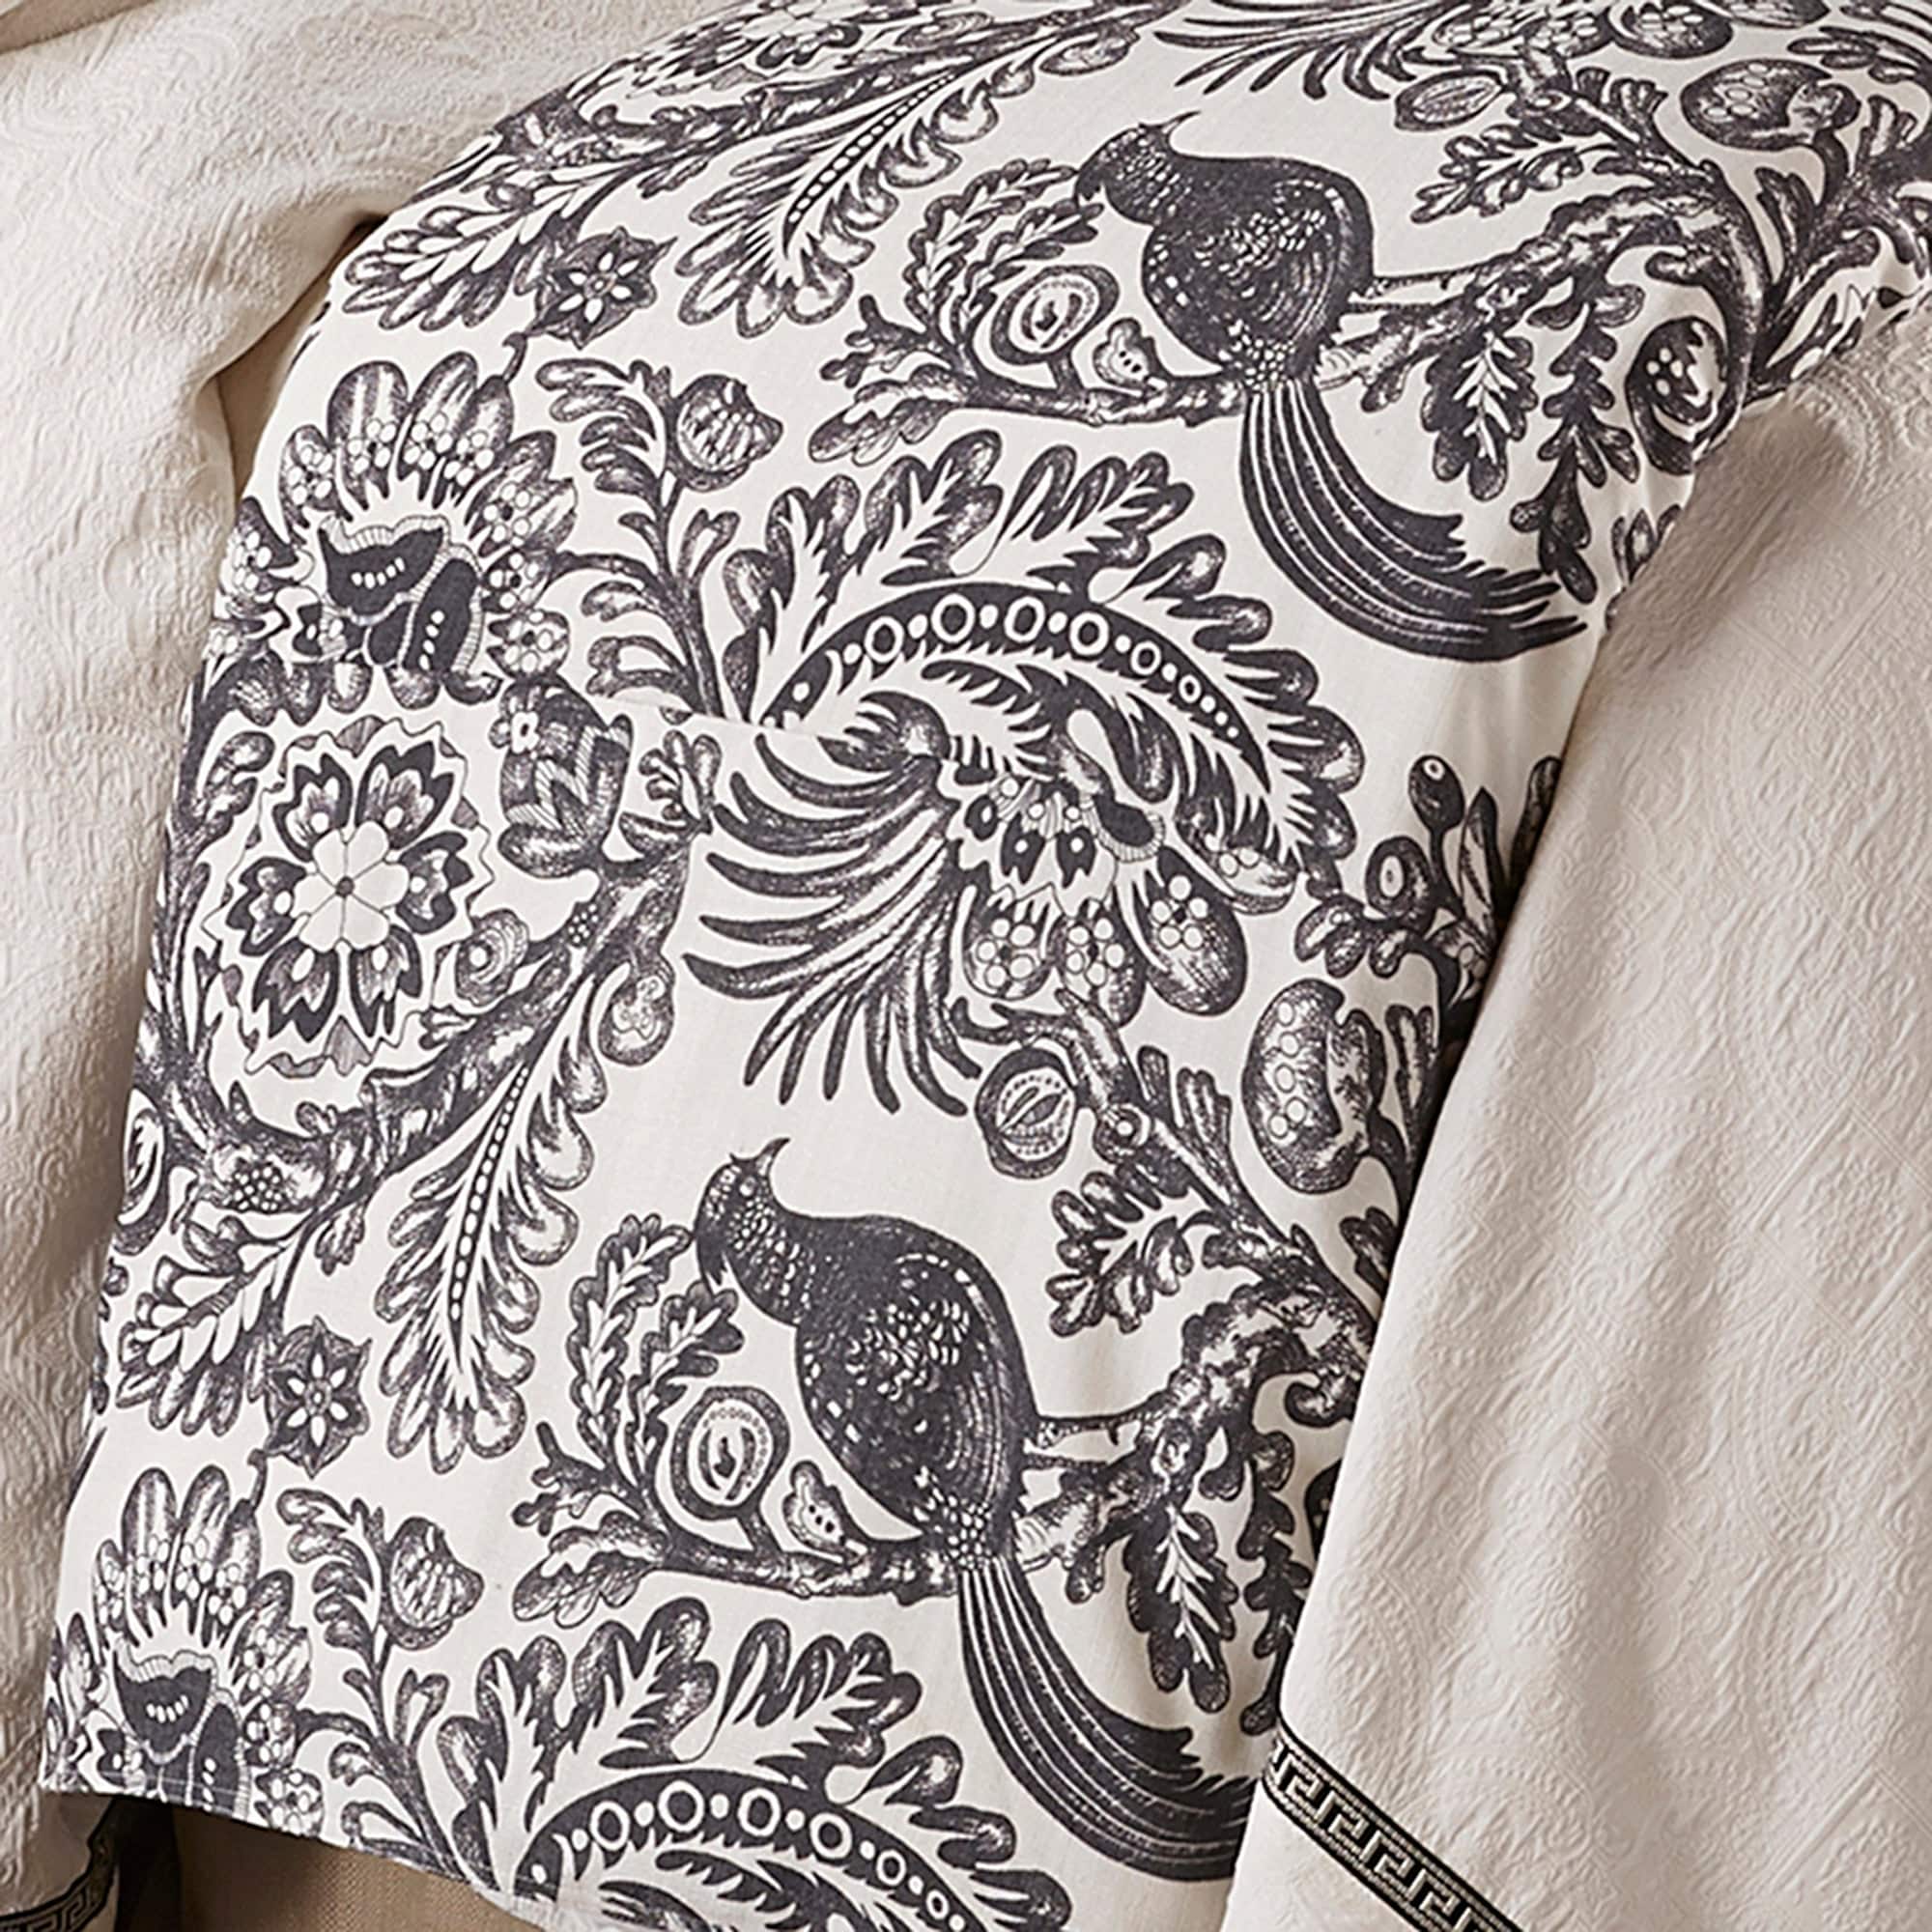 HiEnd Accents Augusta Black and White Botanical Toile Duvet Cover,1PC ...